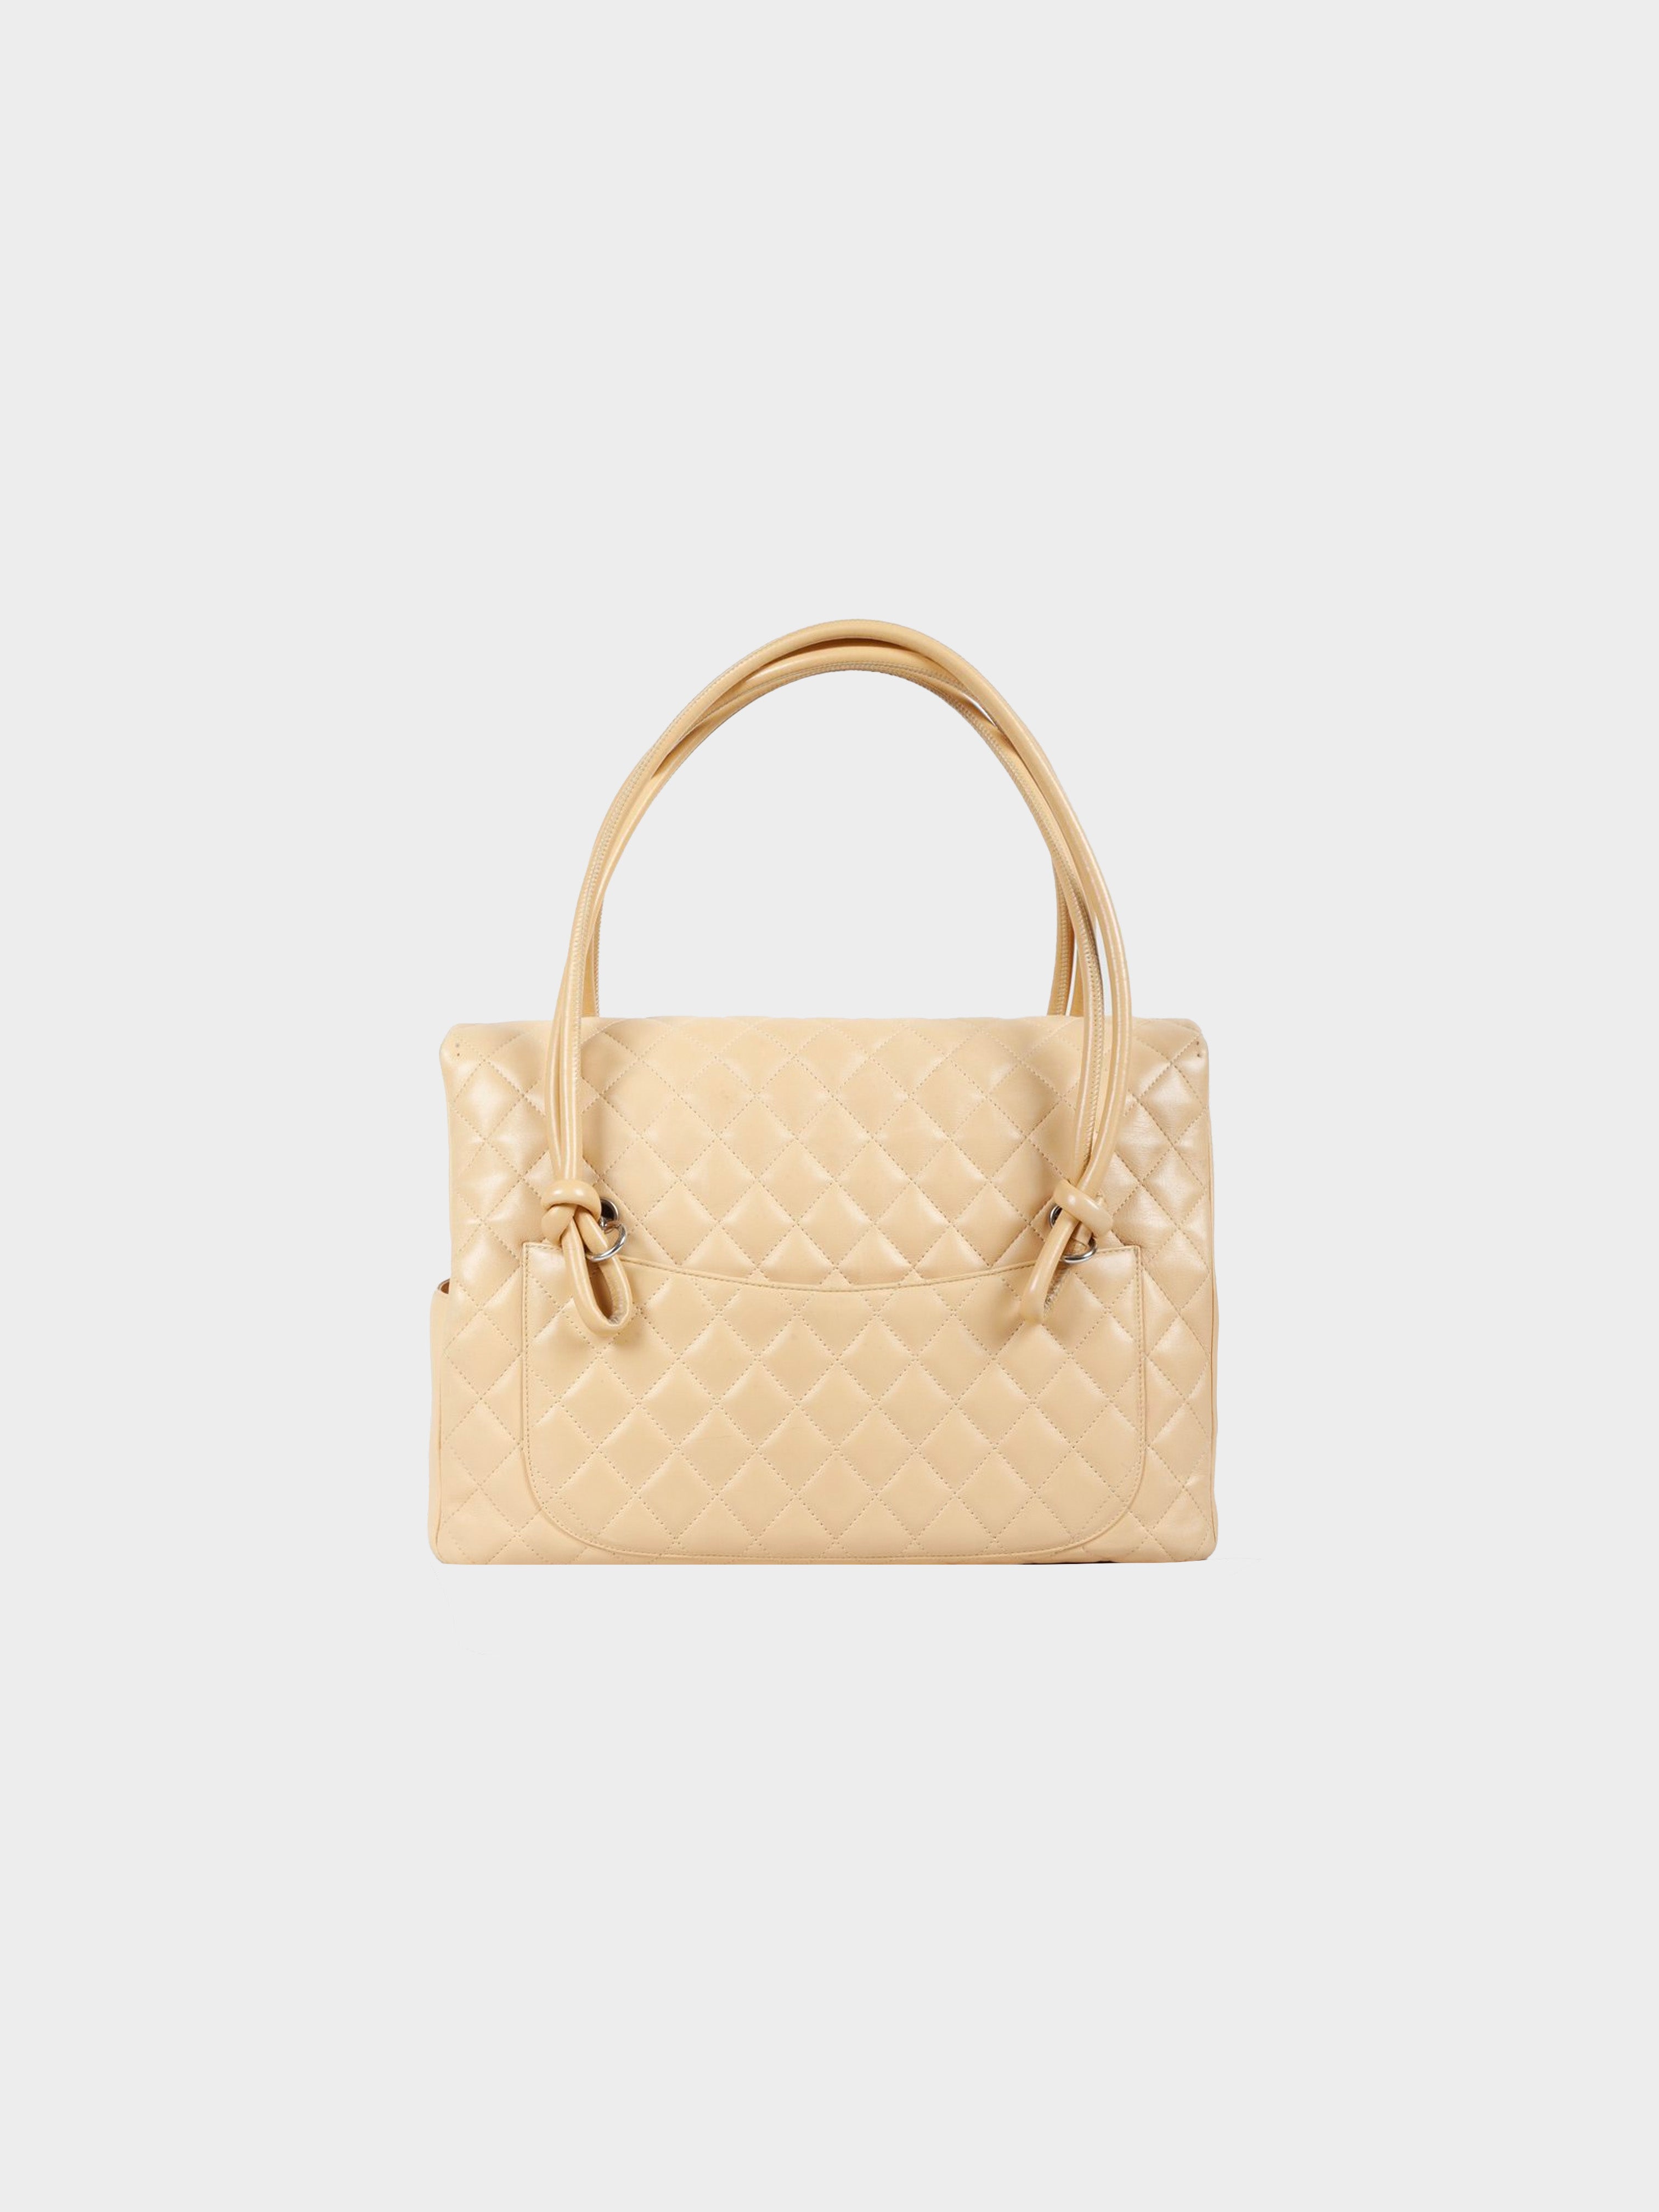 Chanel Cambon Leather Tote Bag Beige